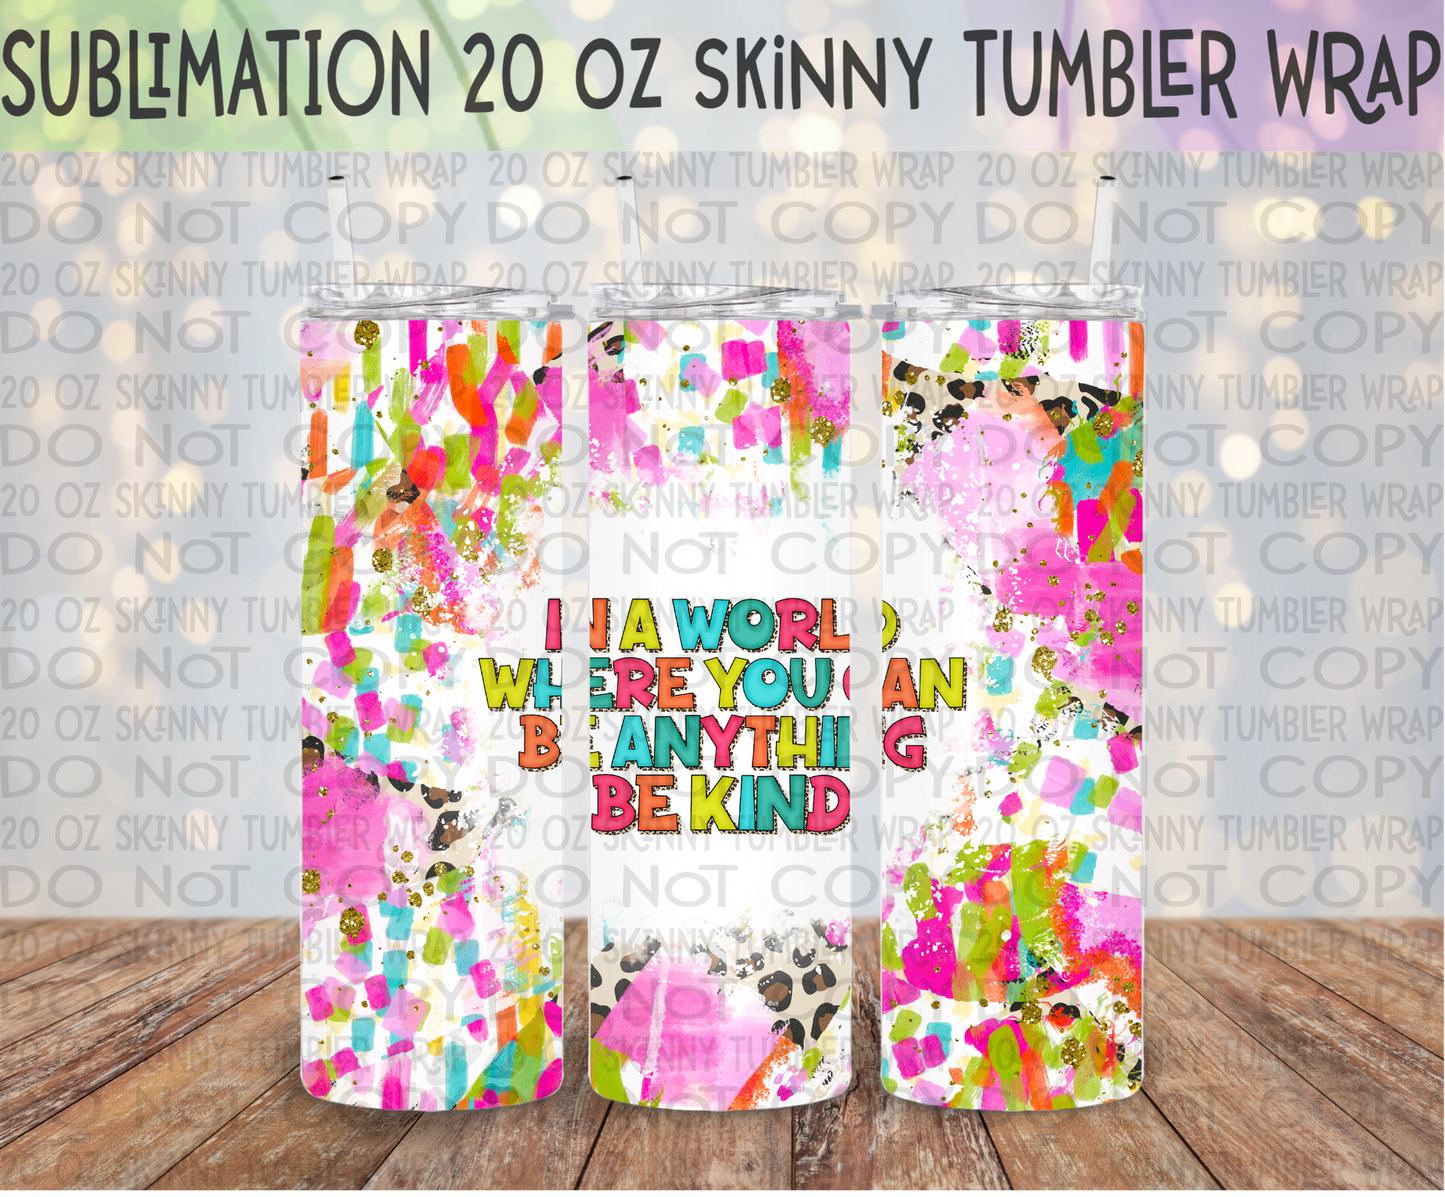 In a World Where You Can Be Anything Be Kind 20 Oz Skinny Tumbler Wrap - Sublimation Transfer - RTS